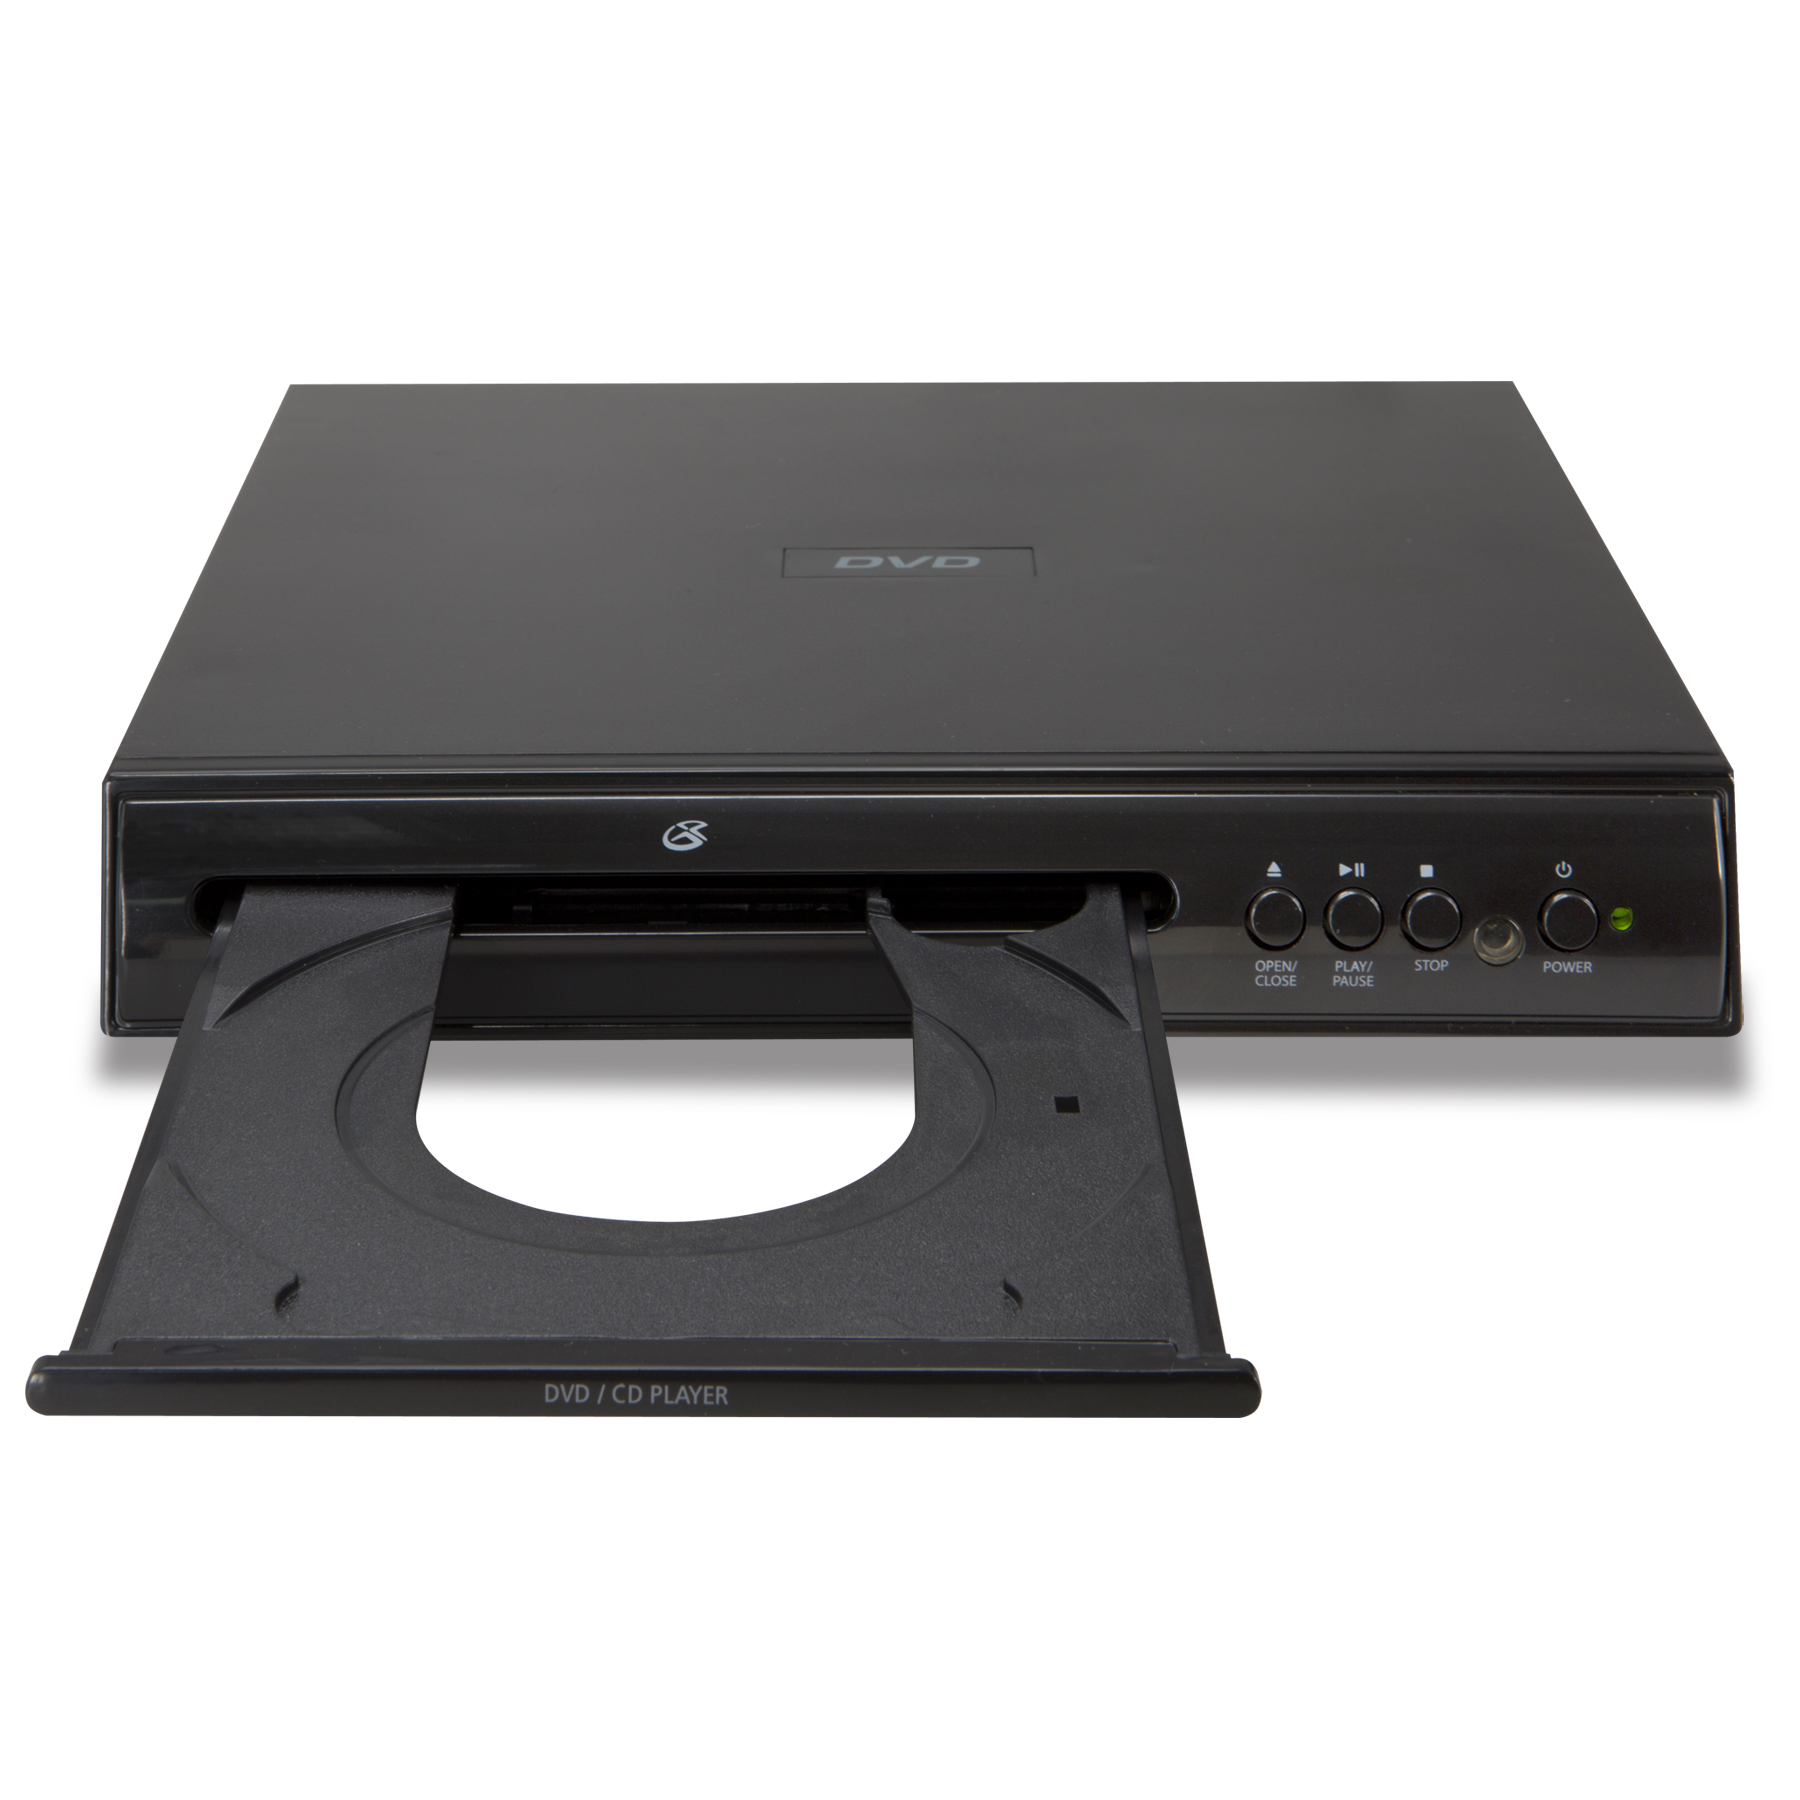 GPX D200B Progressive Scan DVD Player with Remote, Black - image 4 of 5